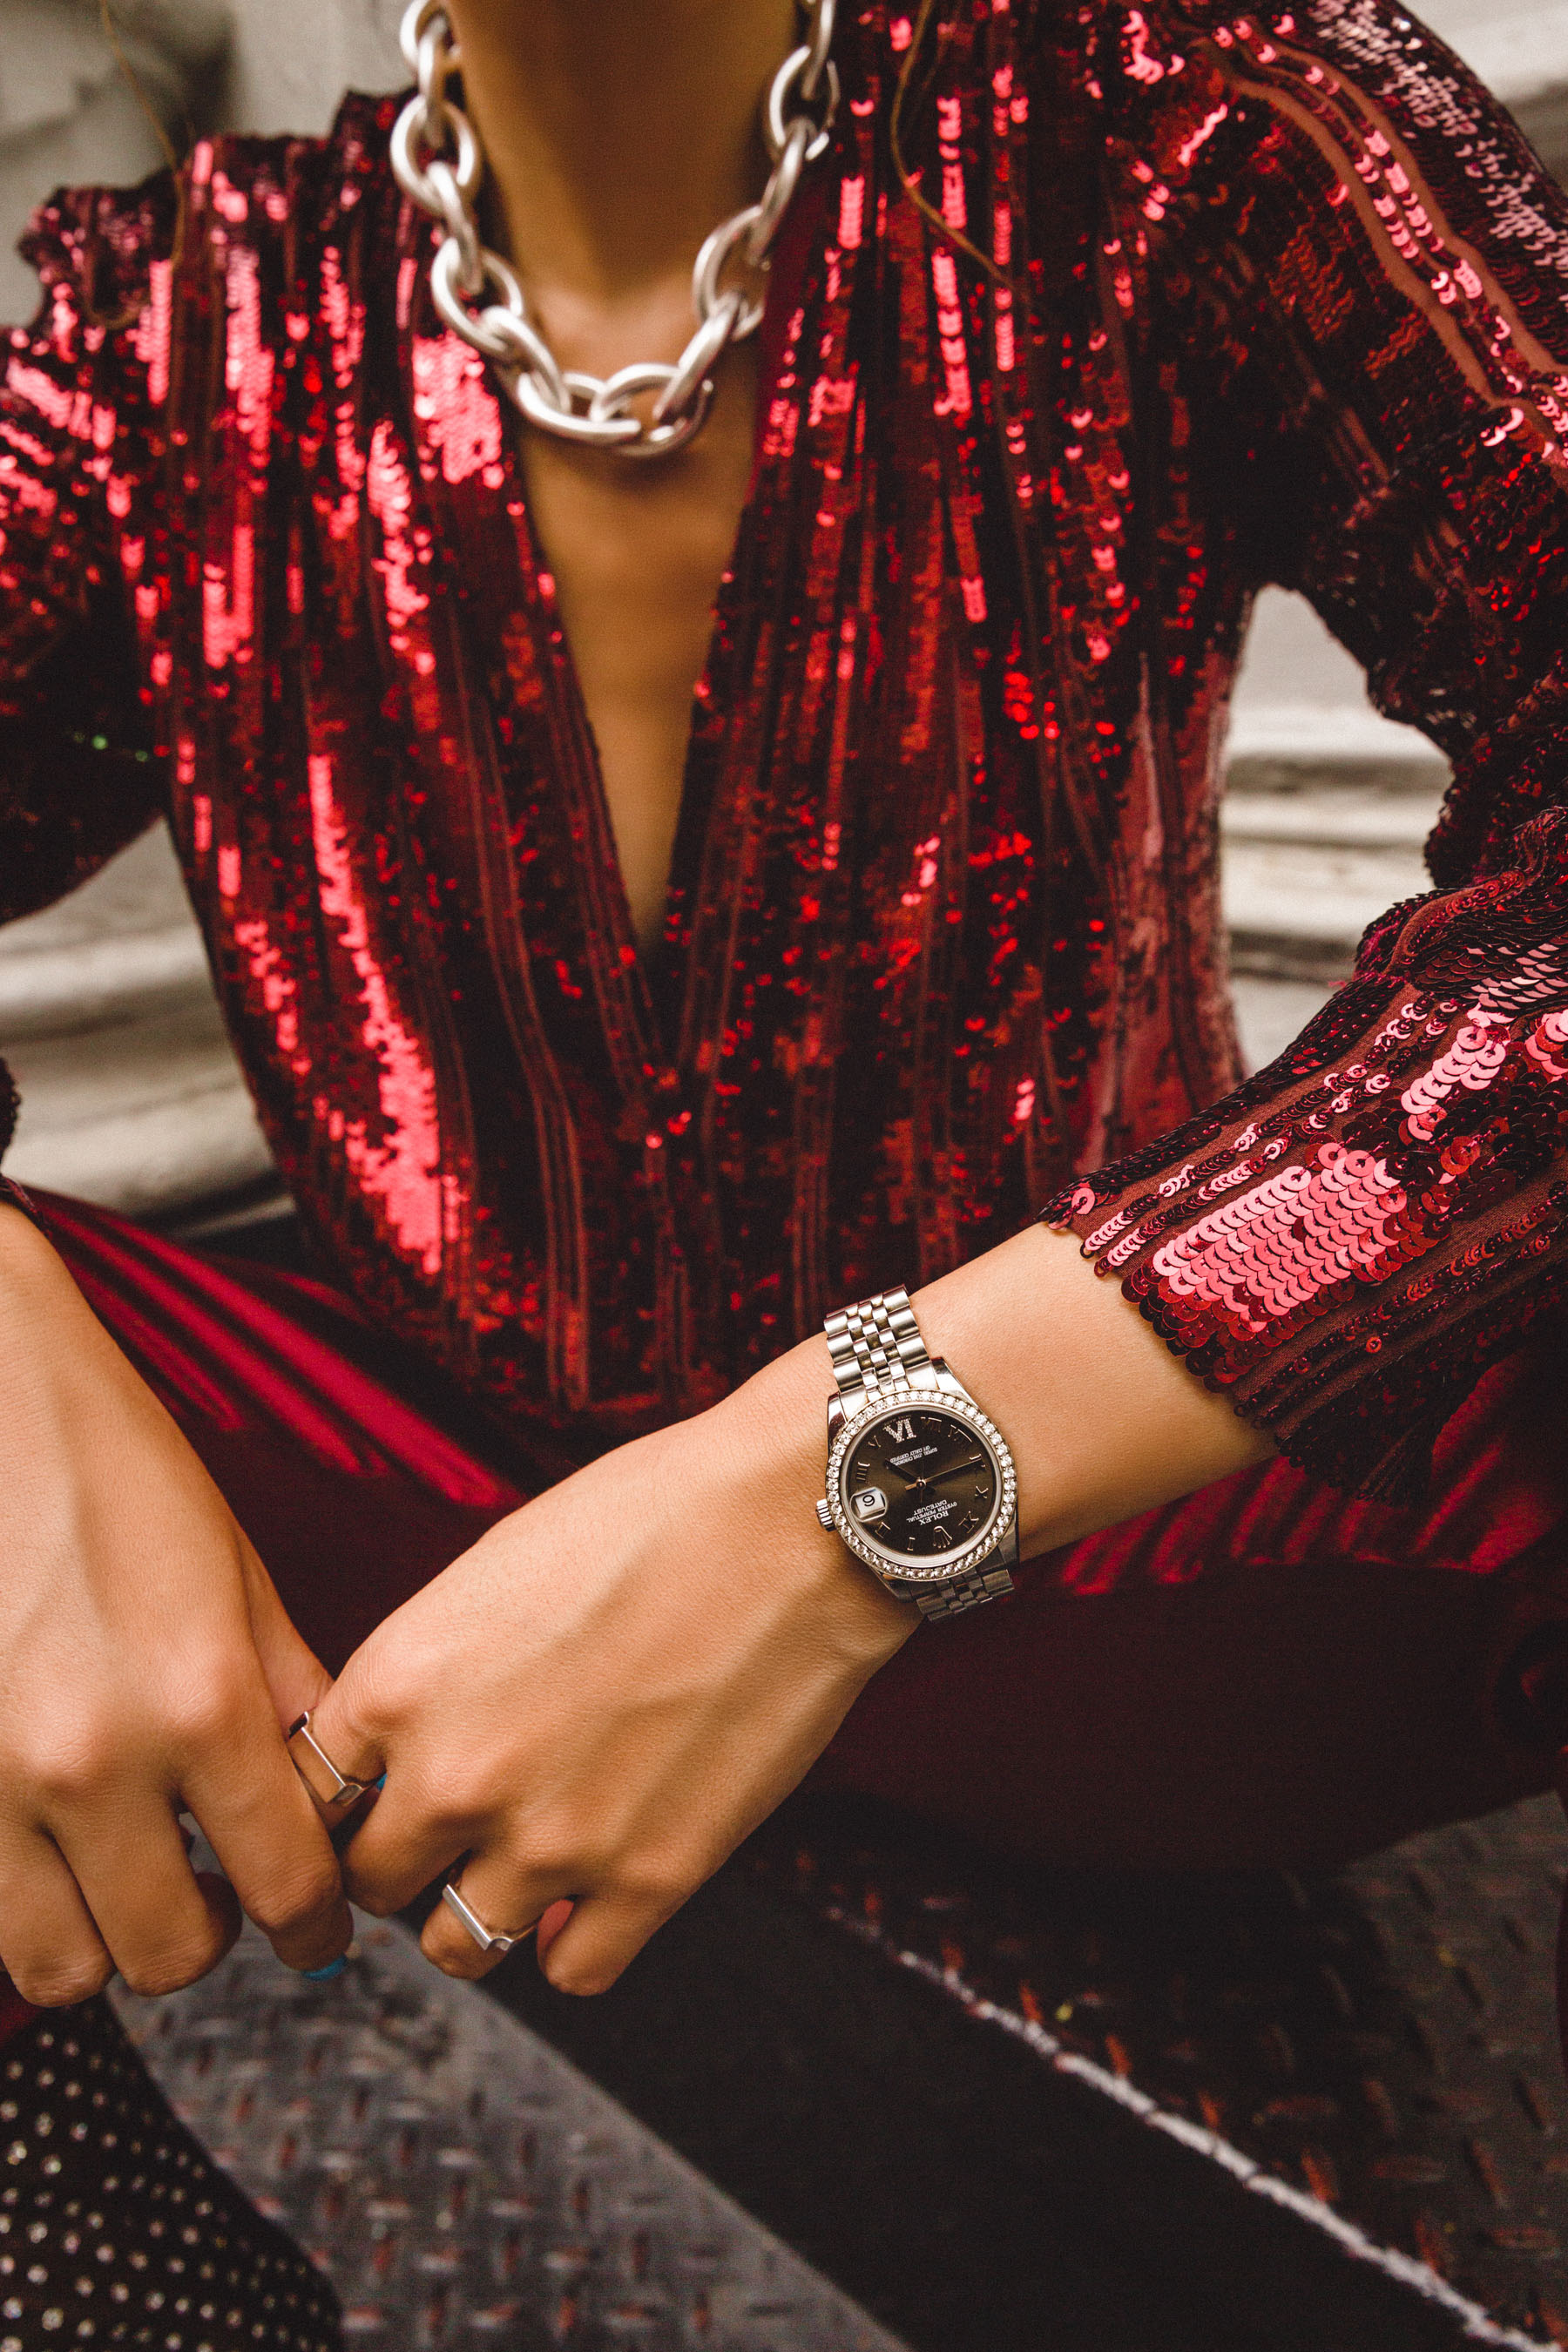 reasons to buy a luxury watch, rolex watch, red sequin top, nyfw street style // Notjessfashion.com